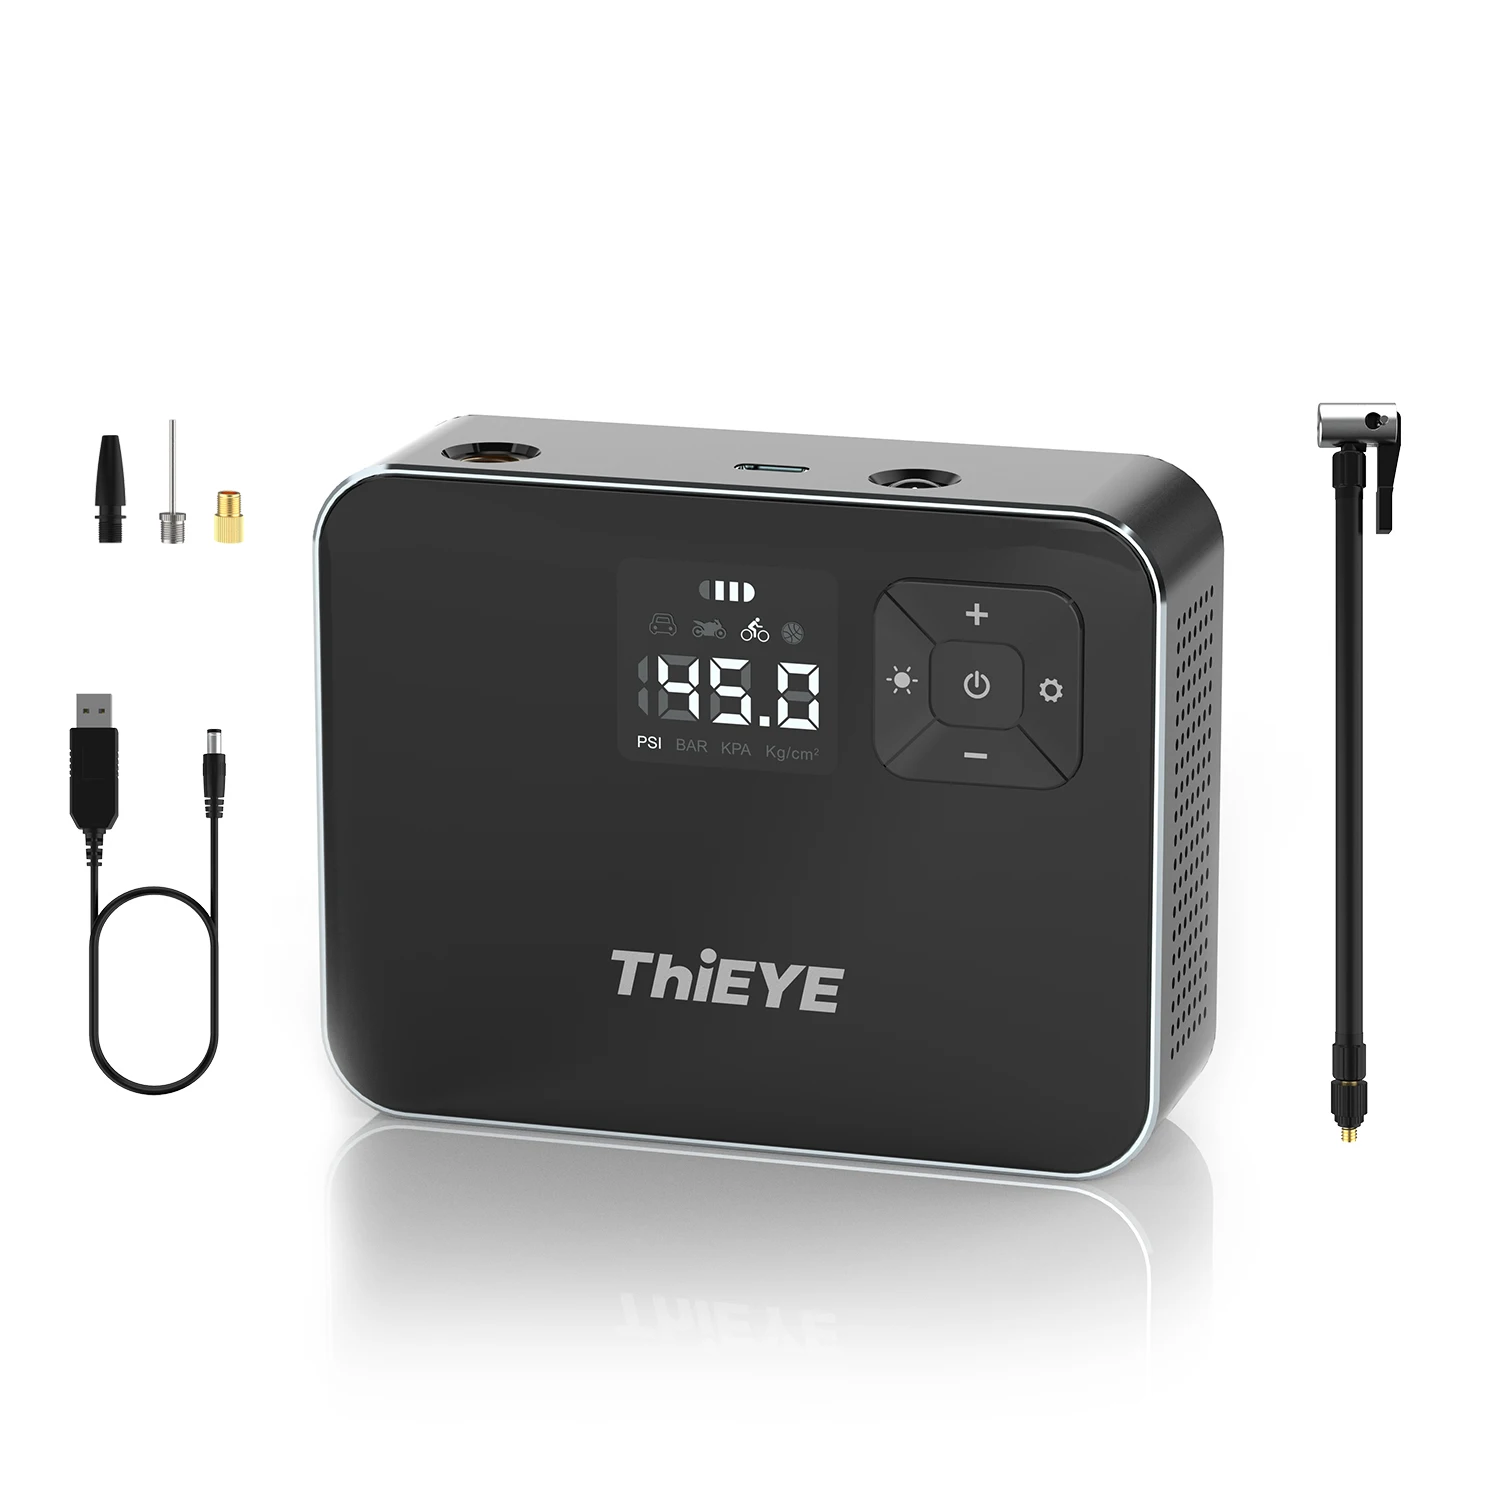 

ThiEYE Compact Air Compressor Car Tyre Inflator with Pressure Gauge & Battery 120PSI Rechargeable Pump For Cars Bikes Motors